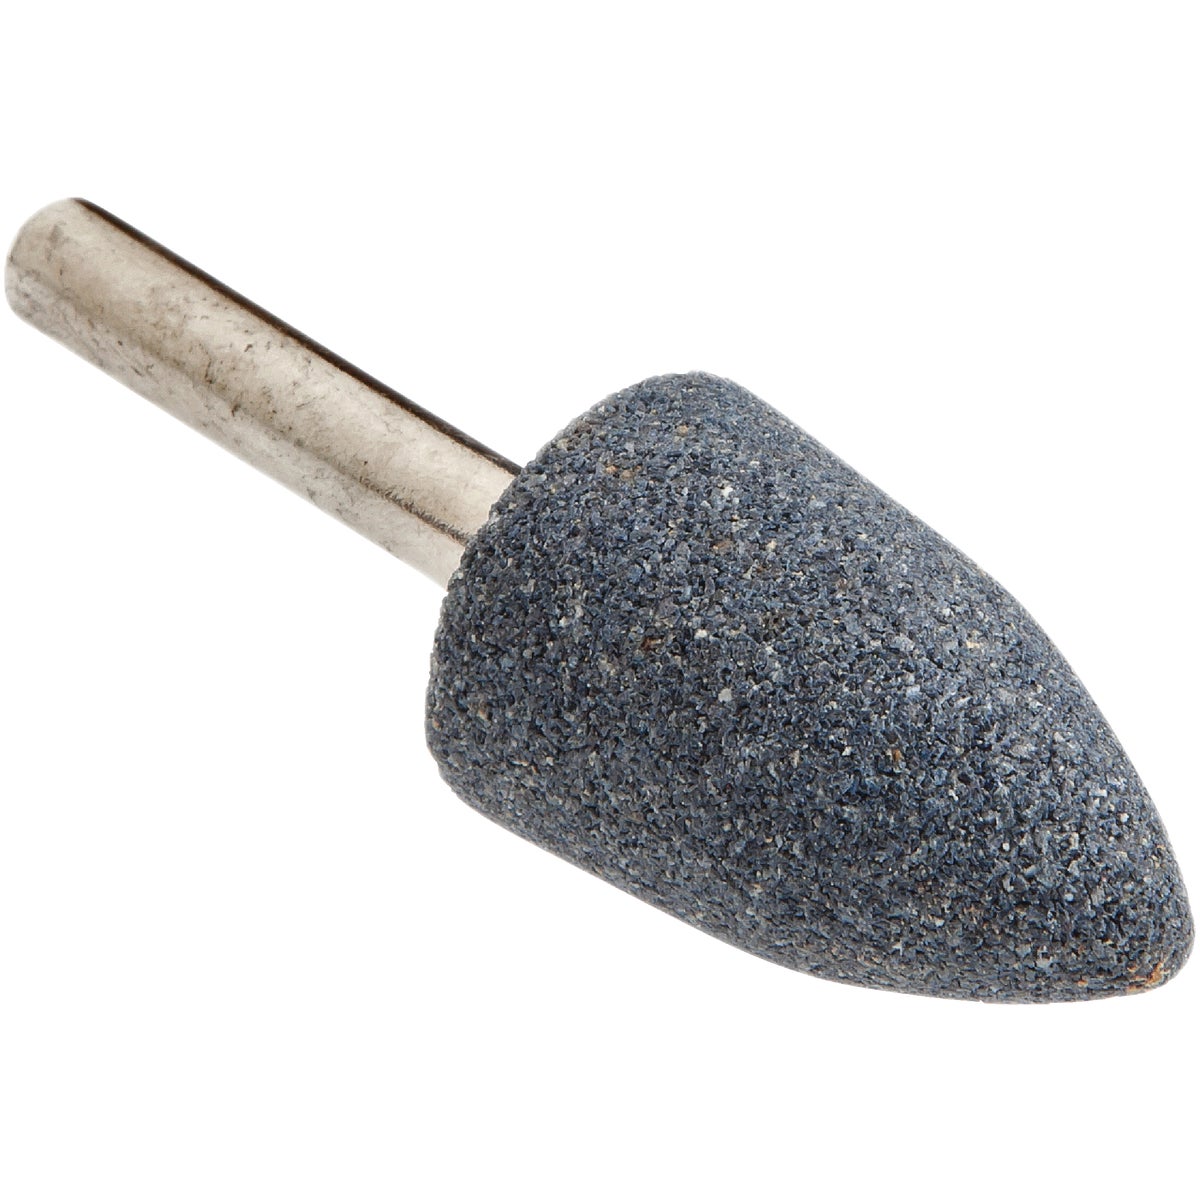 Forney Mounted Point, A12 1-1/4 In. x 3/4 In. Grinding Stone